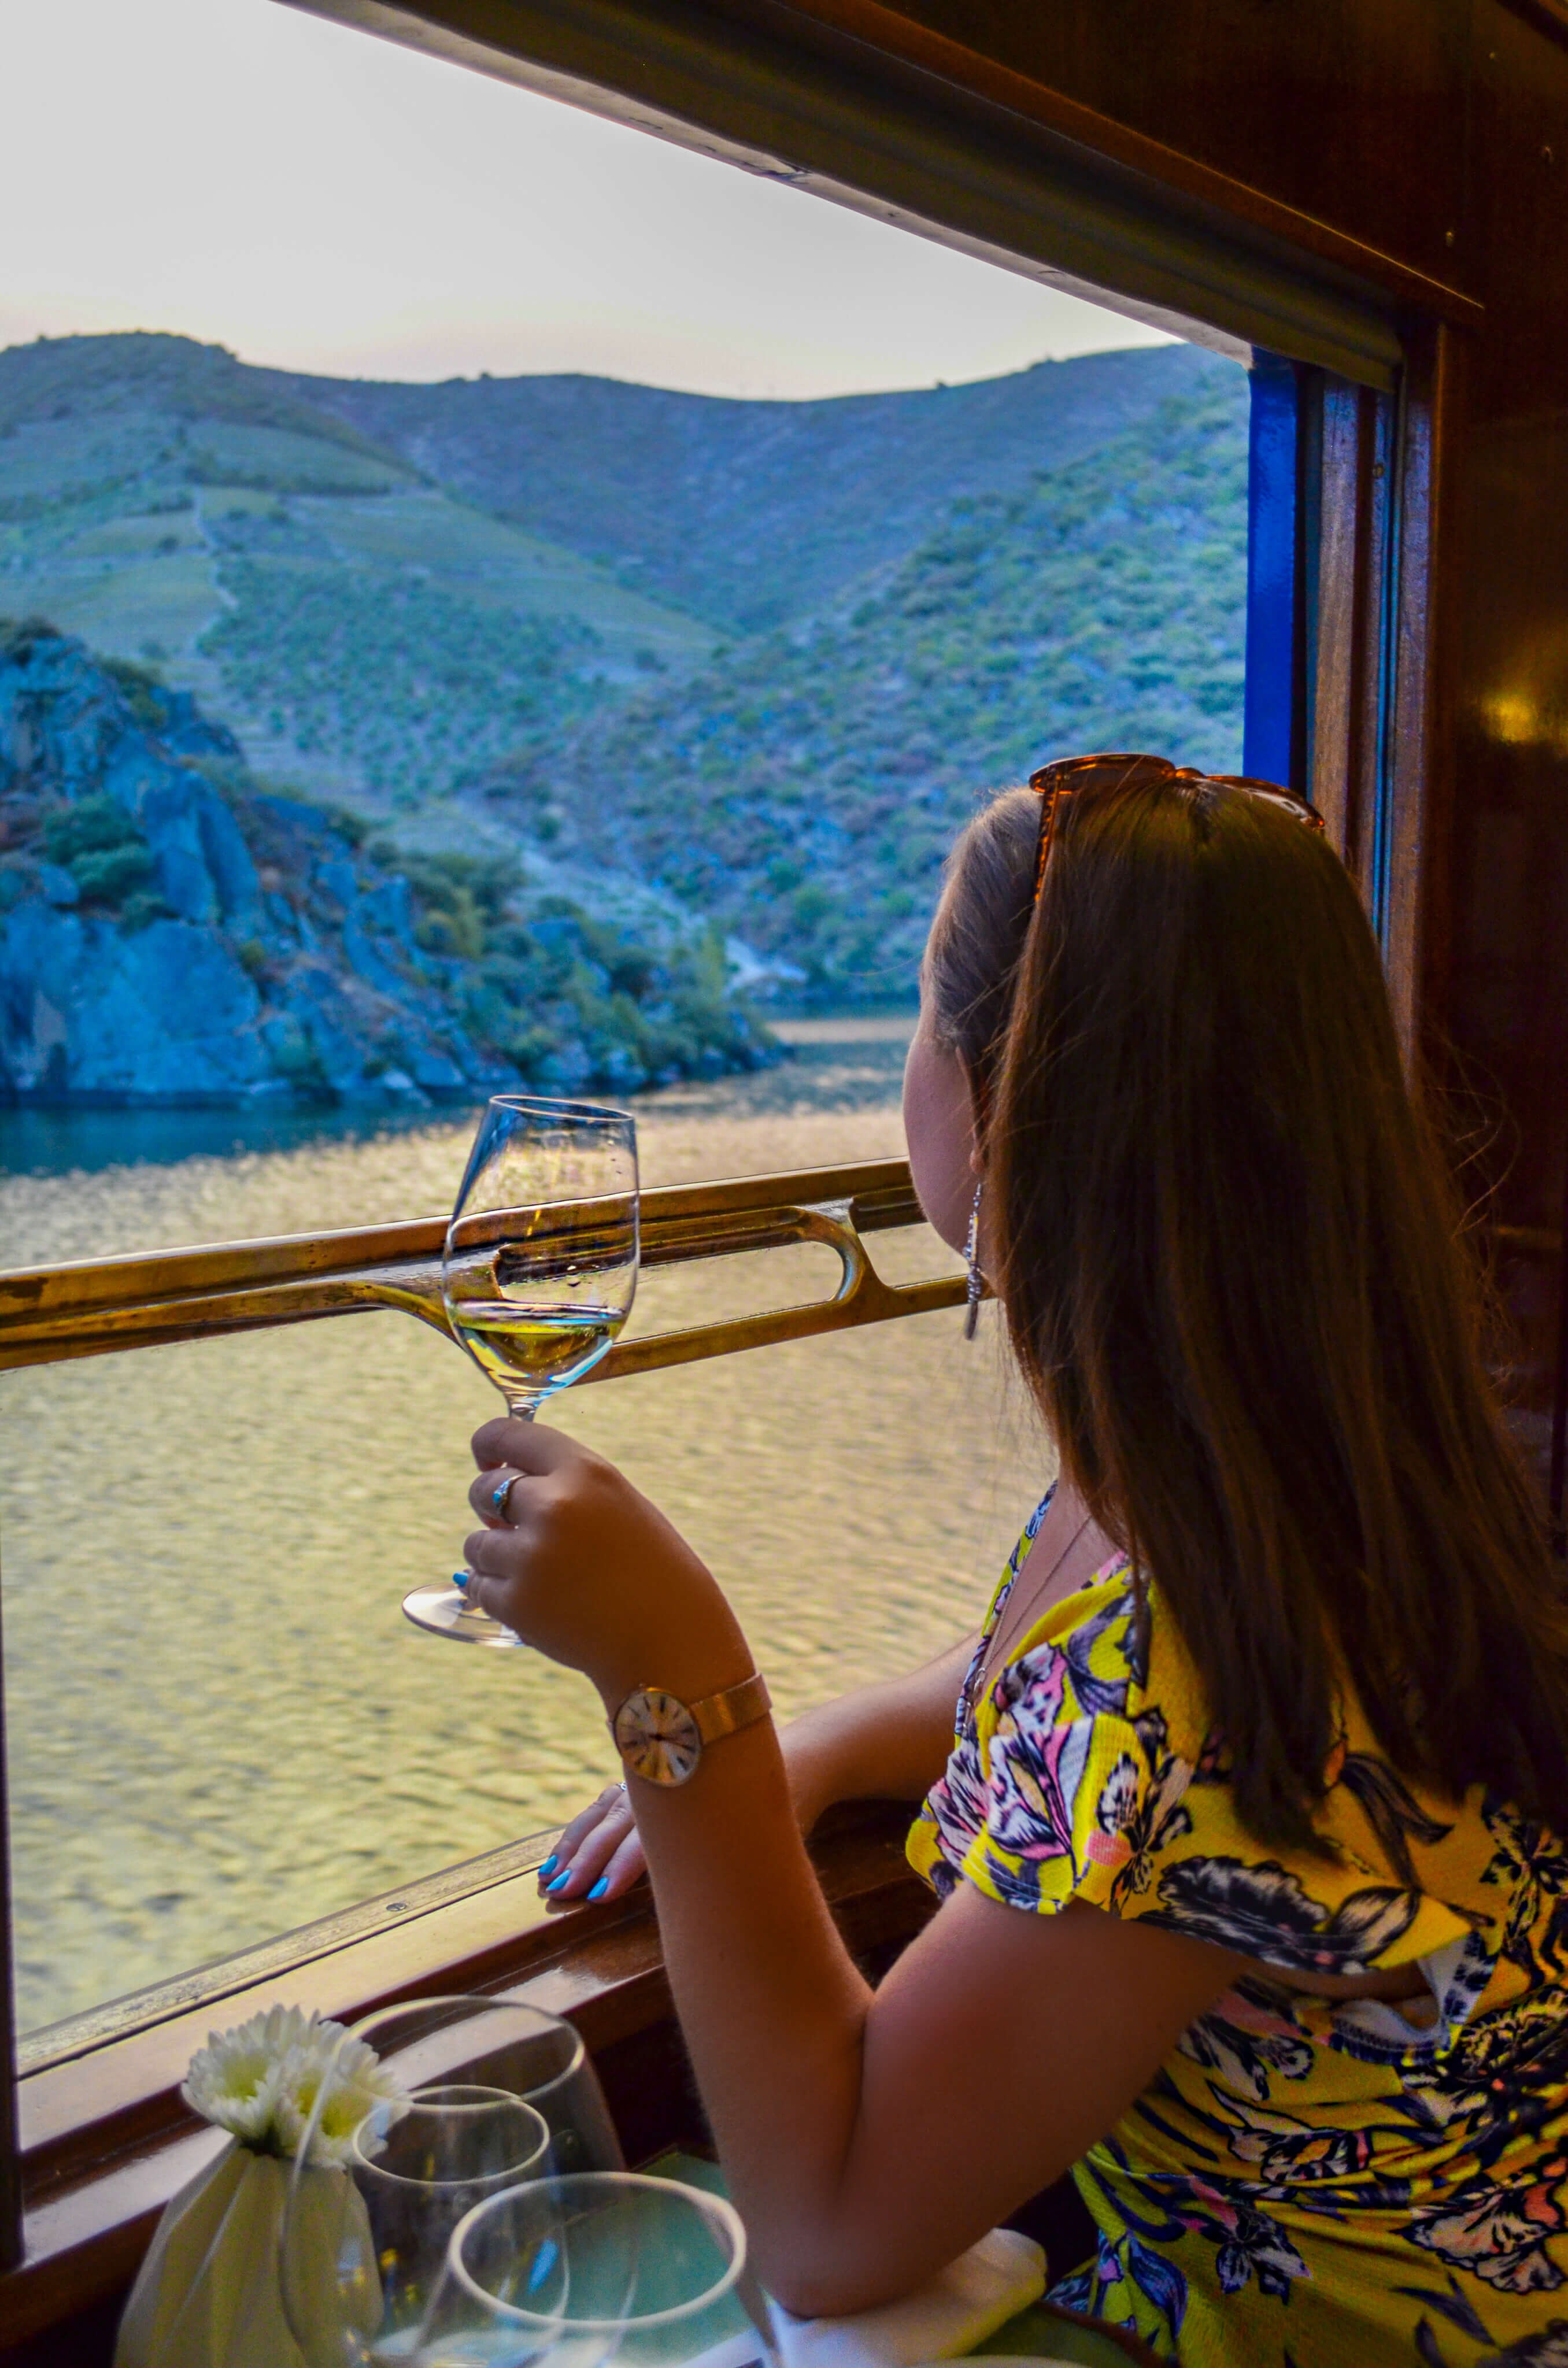 Wine and views of the Douro valley onboard The Presidential gourmet food train, Porto, Portugal